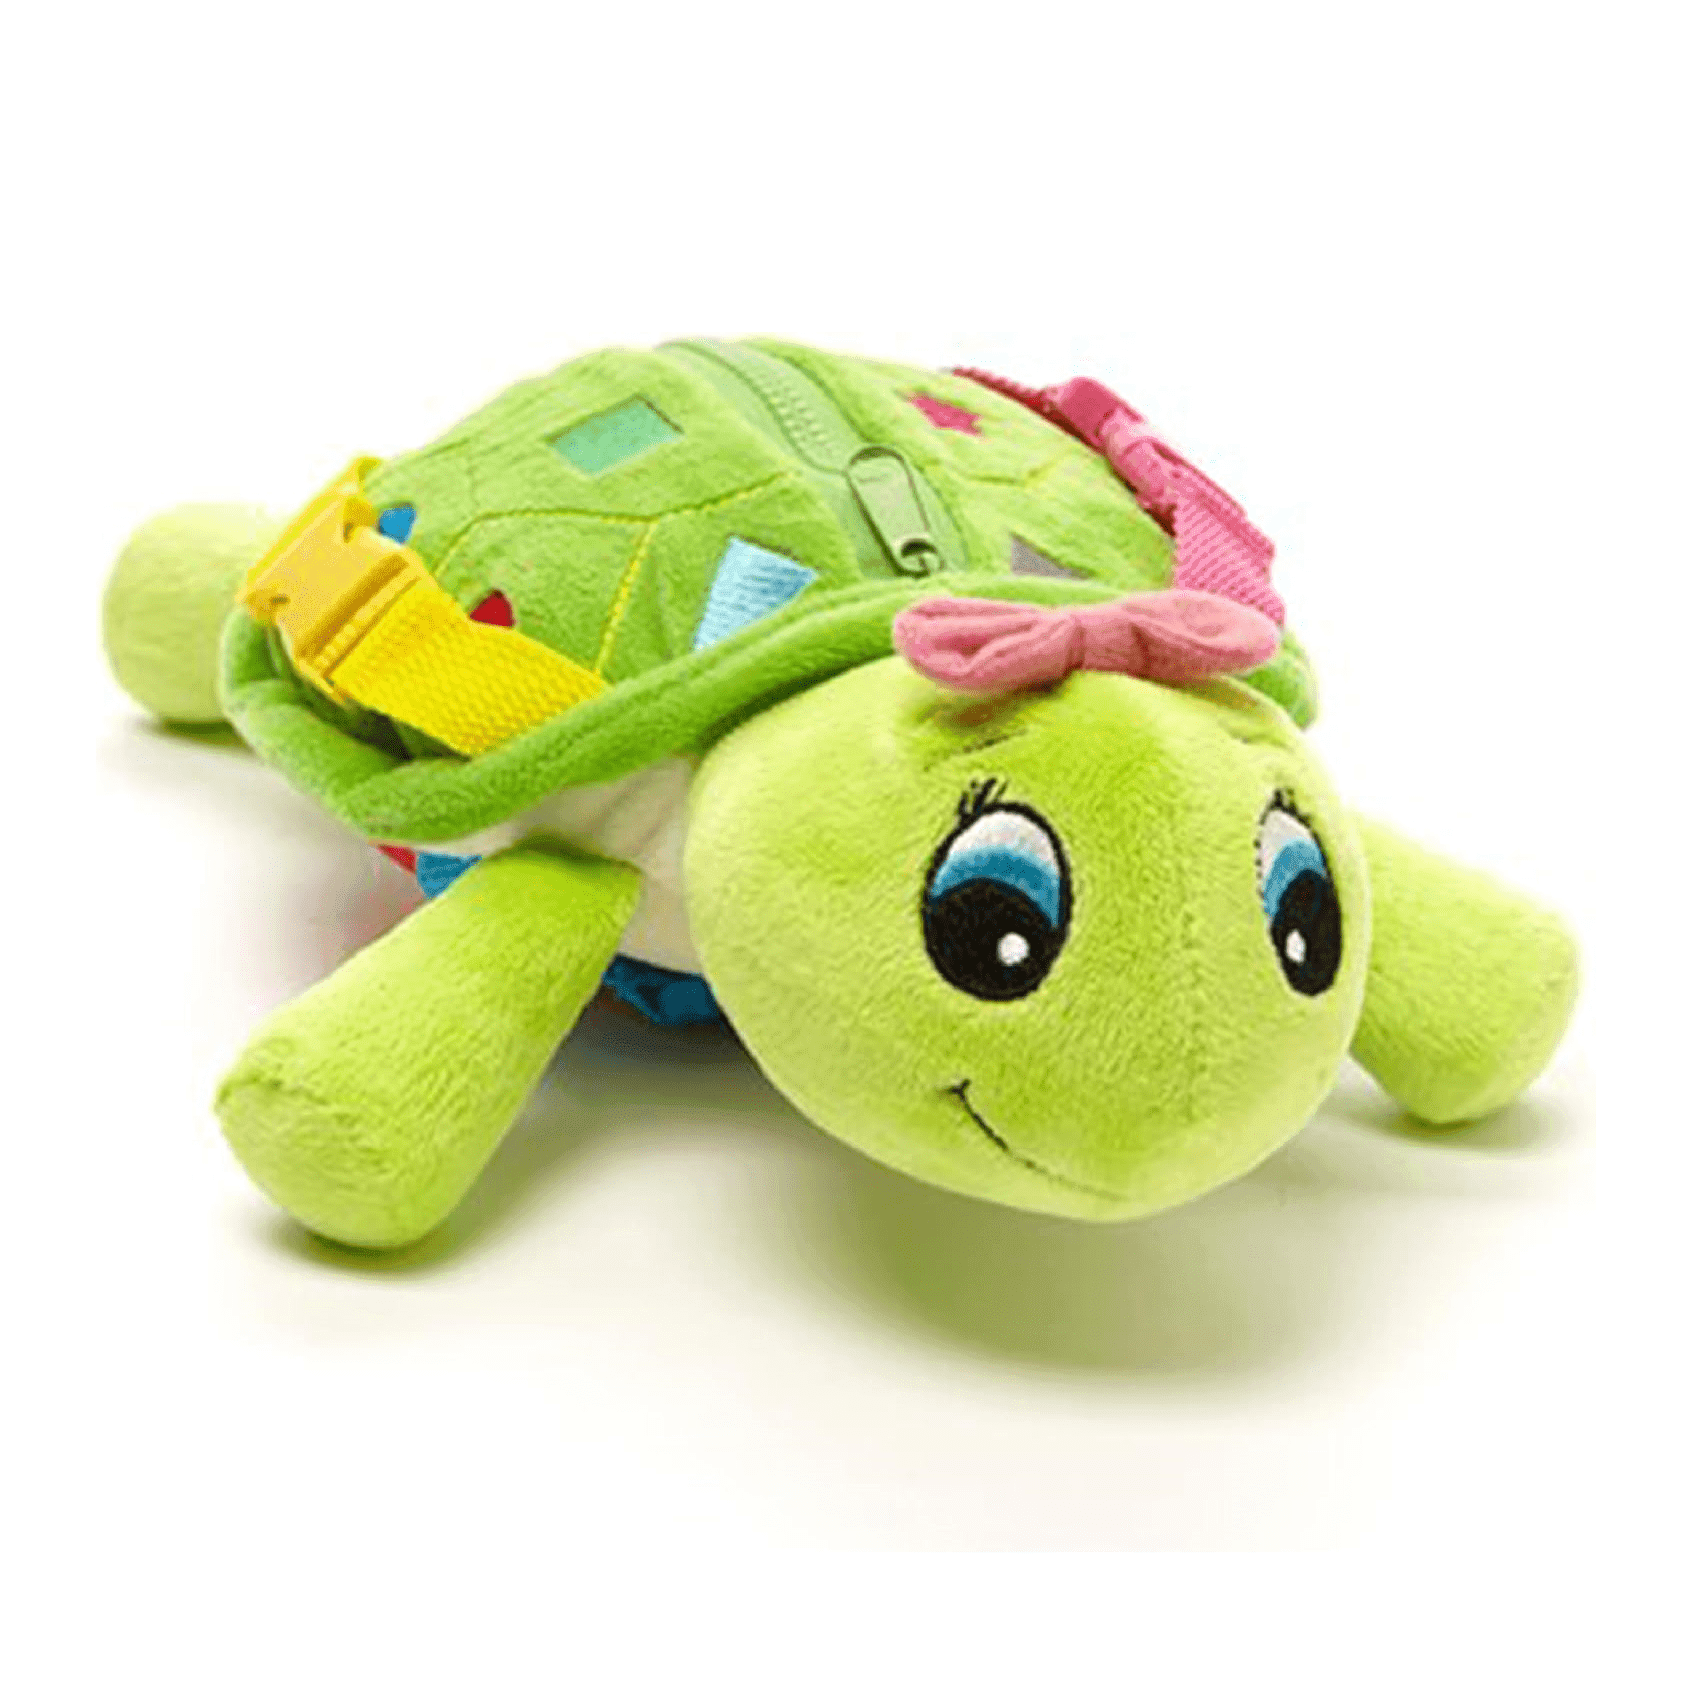 Montessori Buckle Toys Belle Turtle Buckle Toy